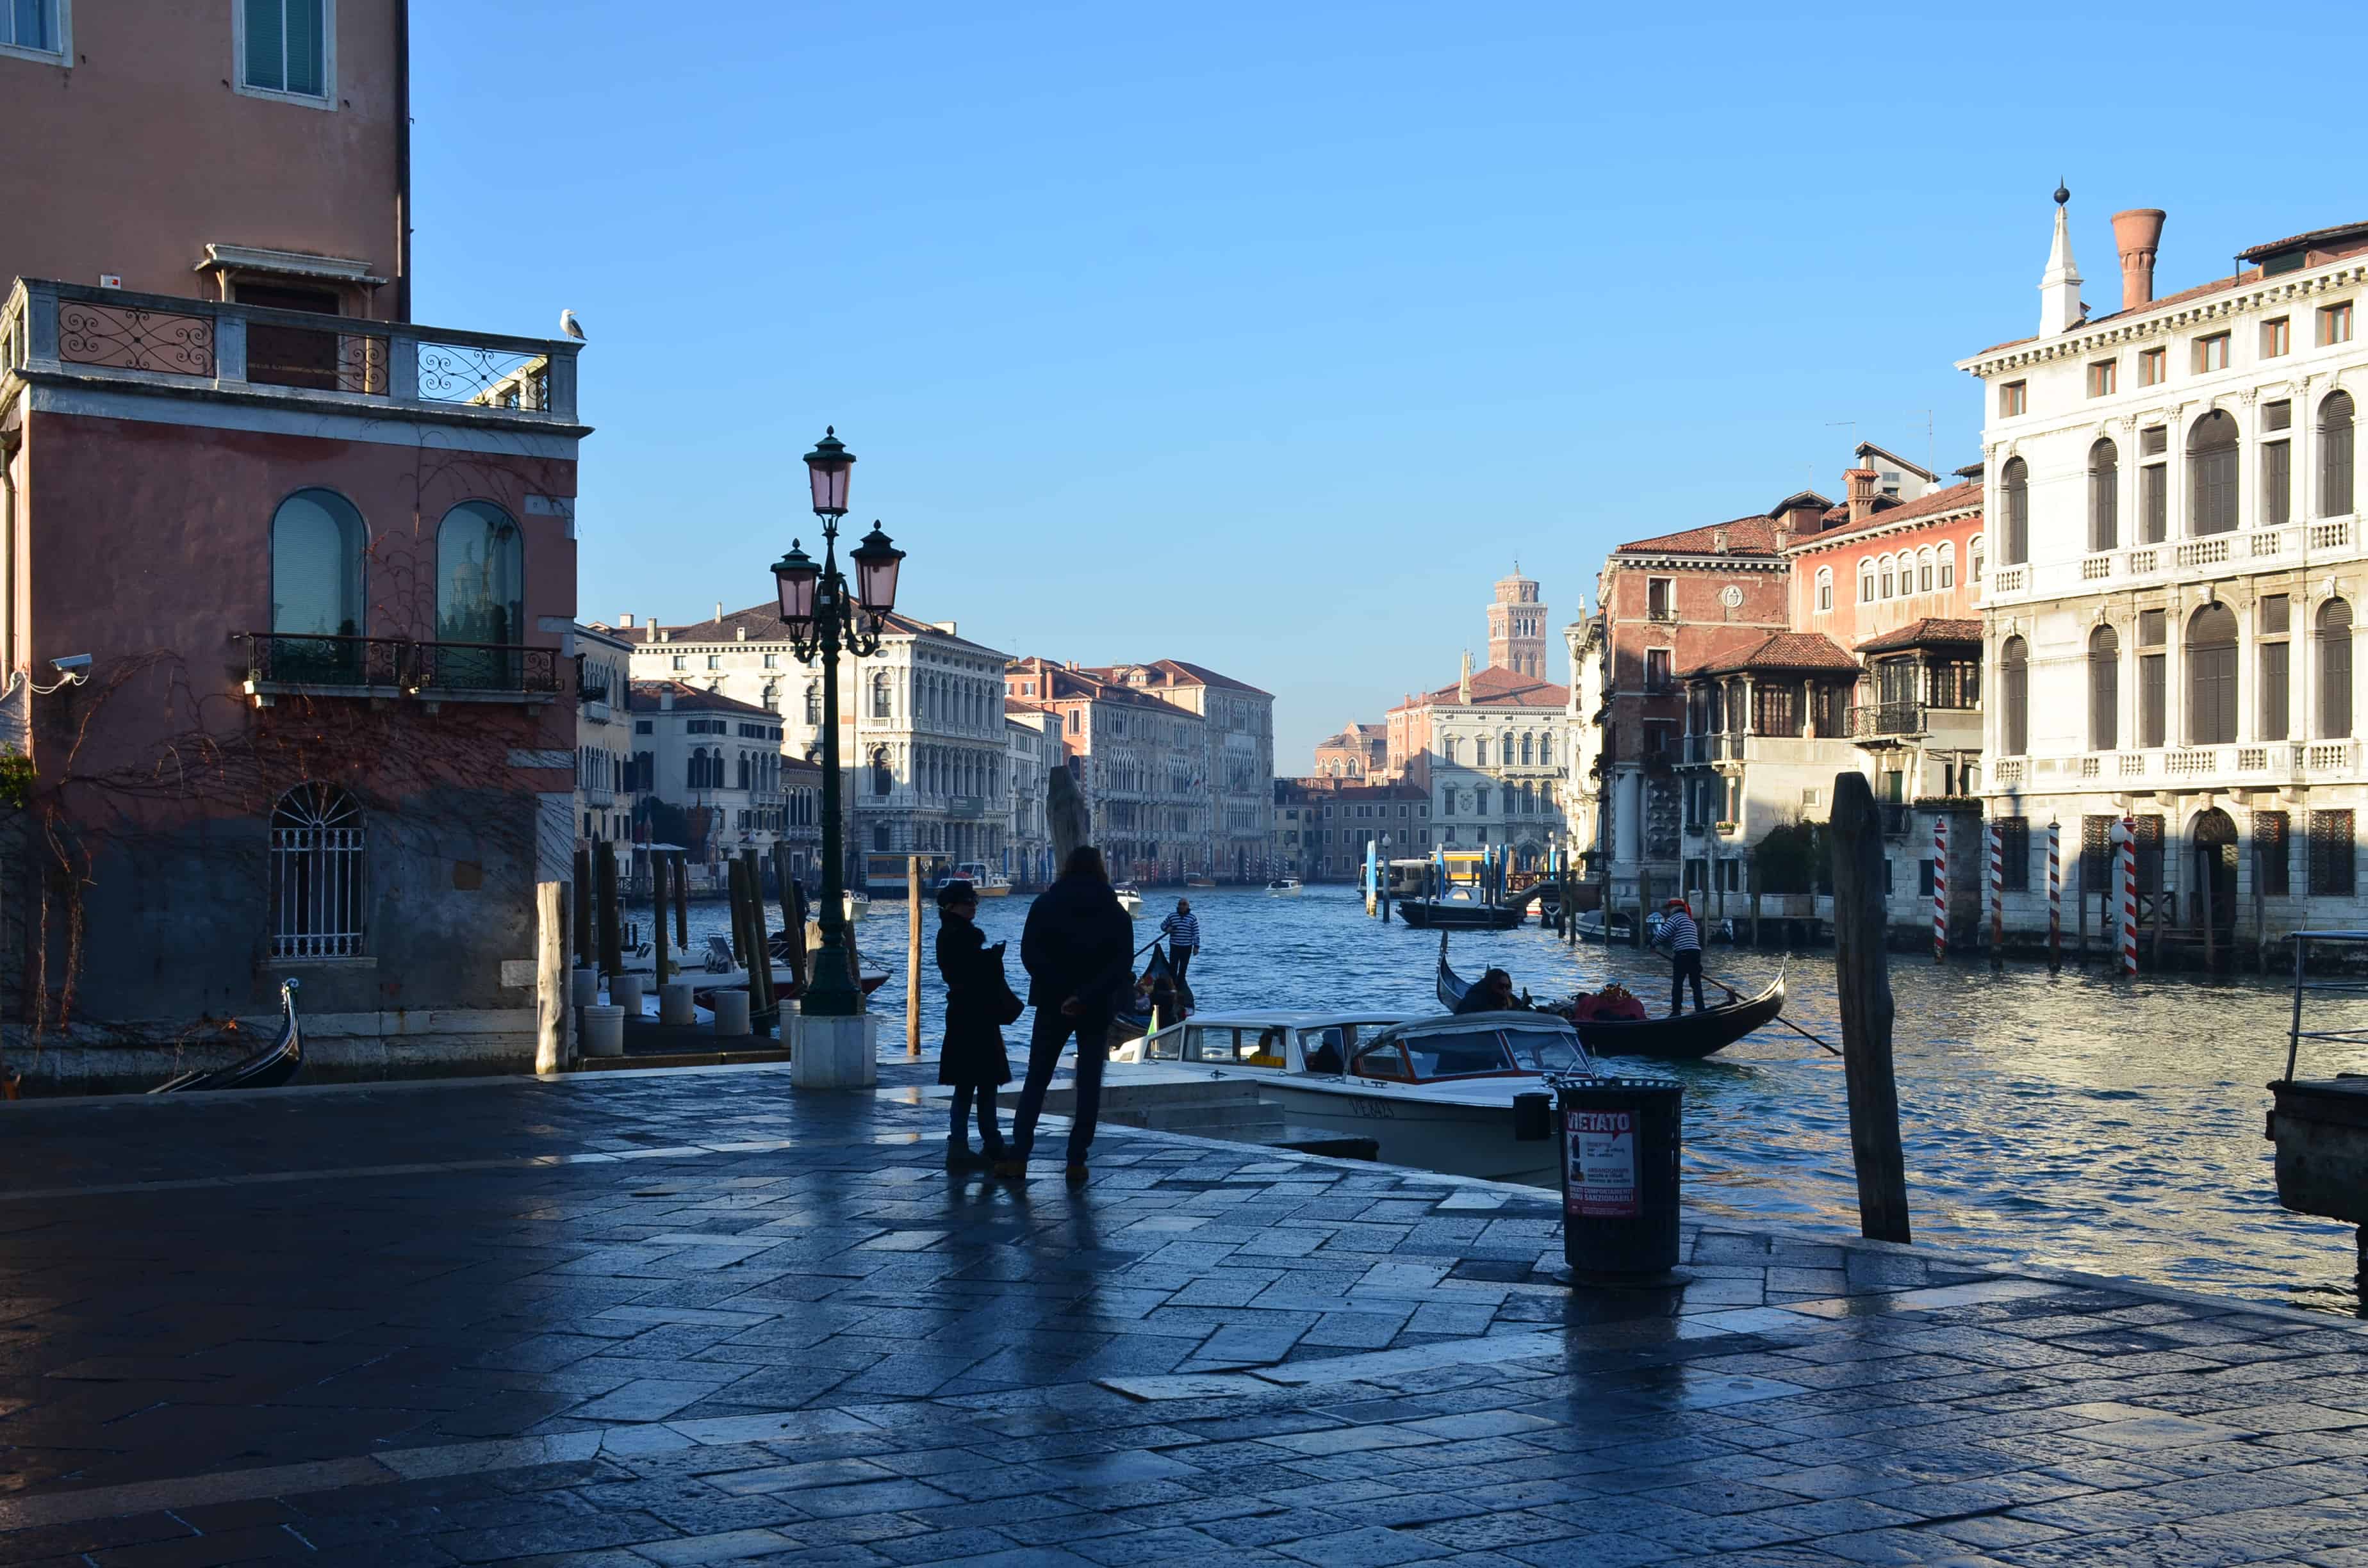 Grand Canal at Accademia in Venice, Italy